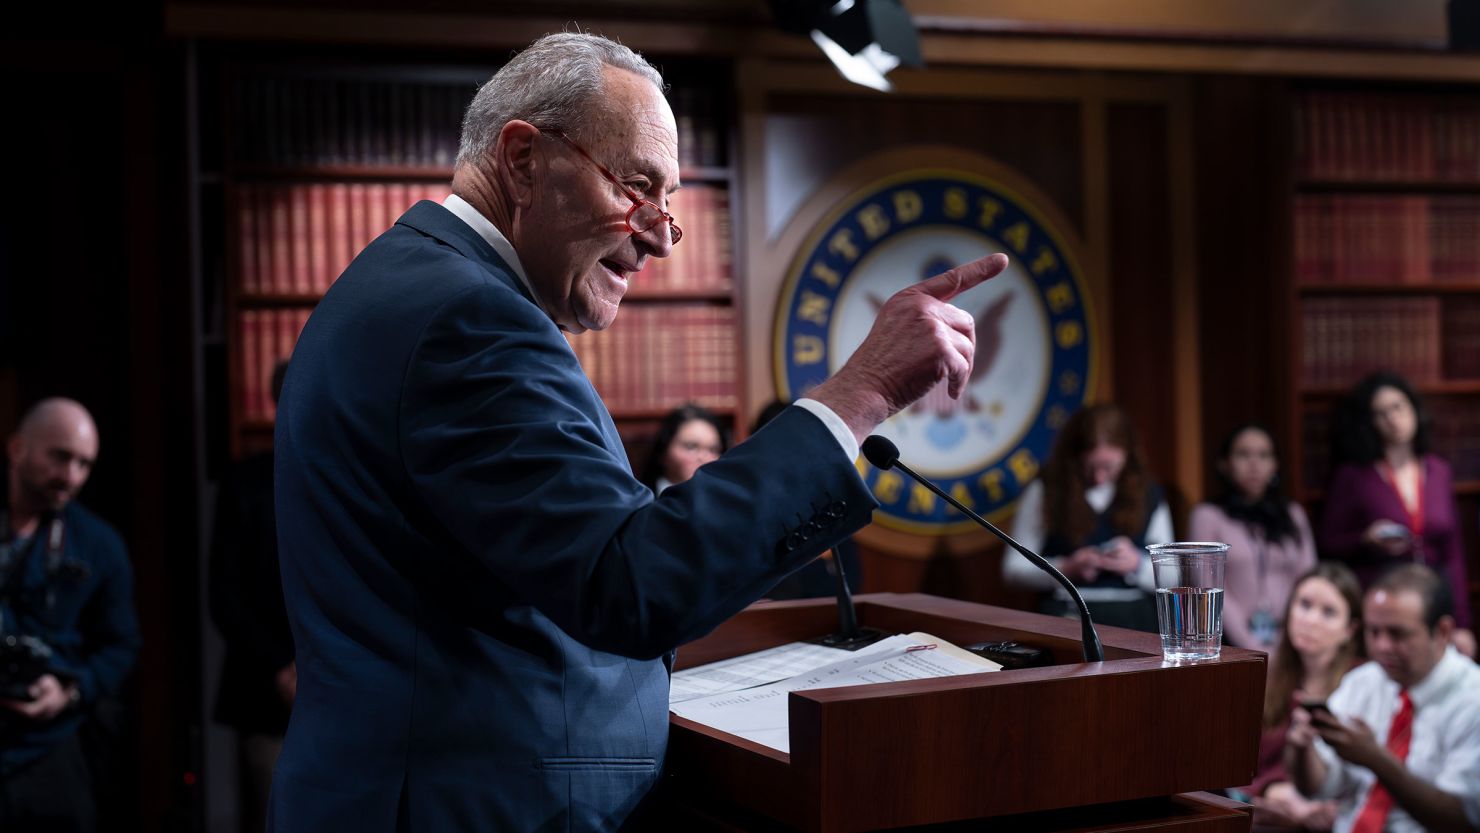 Senate Majority Leader Chuck Schumer meets with reporters before speaking to a massive rally in support of Israel, at the Capitol in Washington, DC, on Tuesday, November 14. 